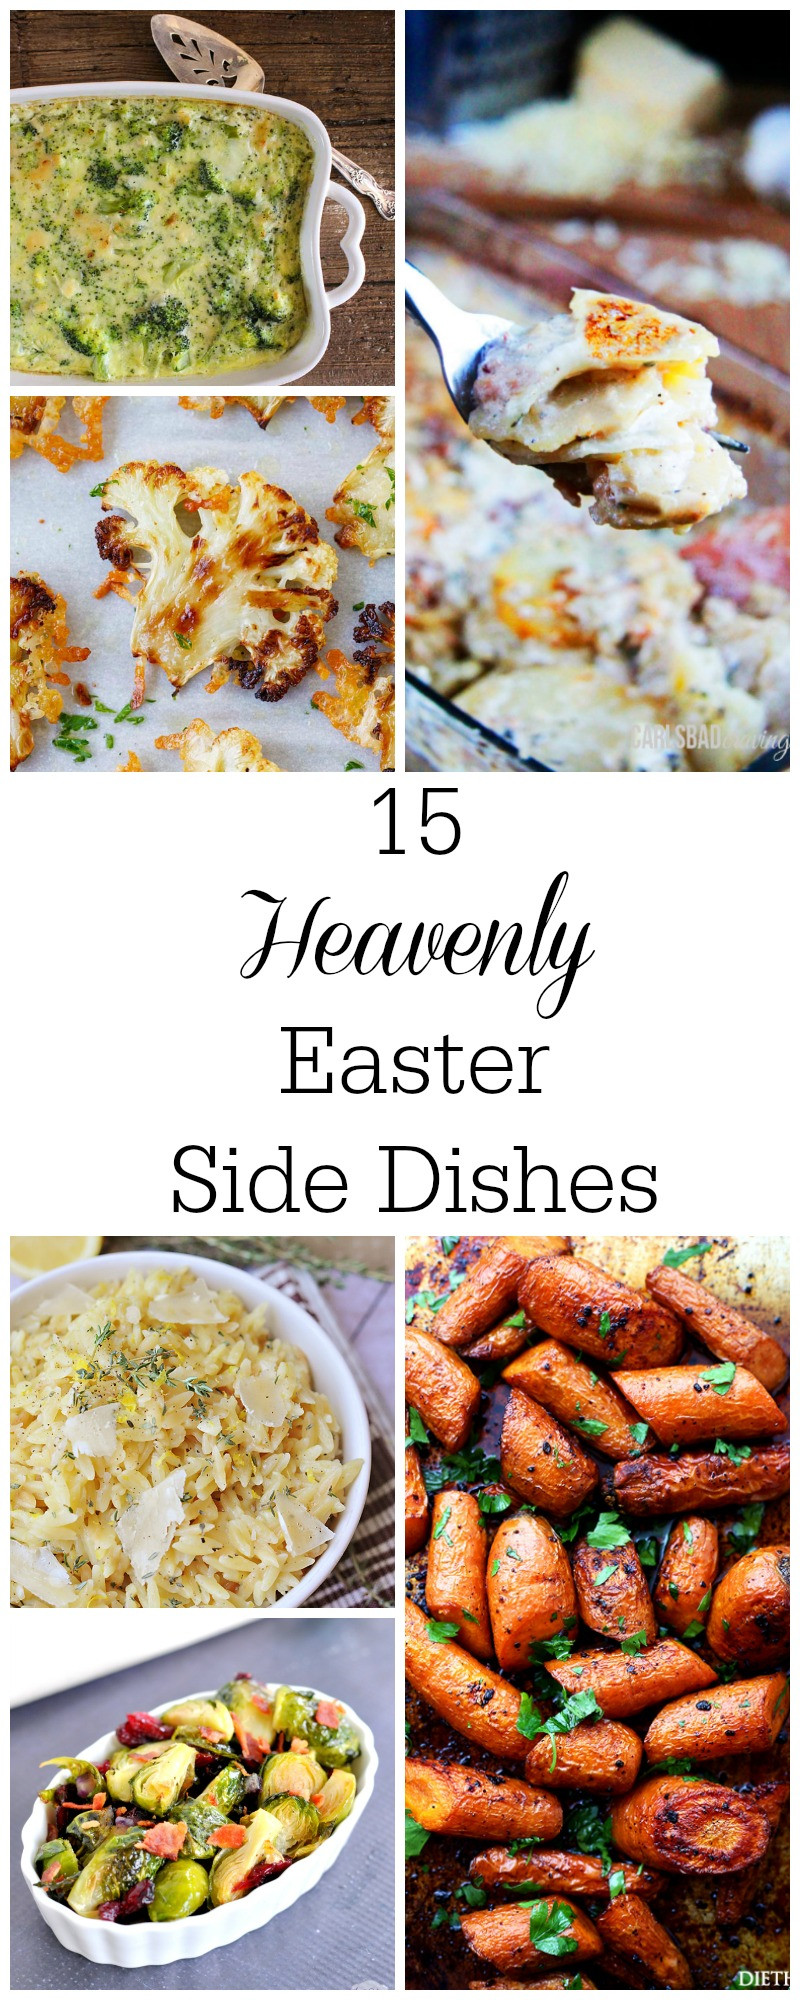 Traditional Easter Side Dishes
 15 Heavenly Easter Side Dishes My Suburban Kitchen